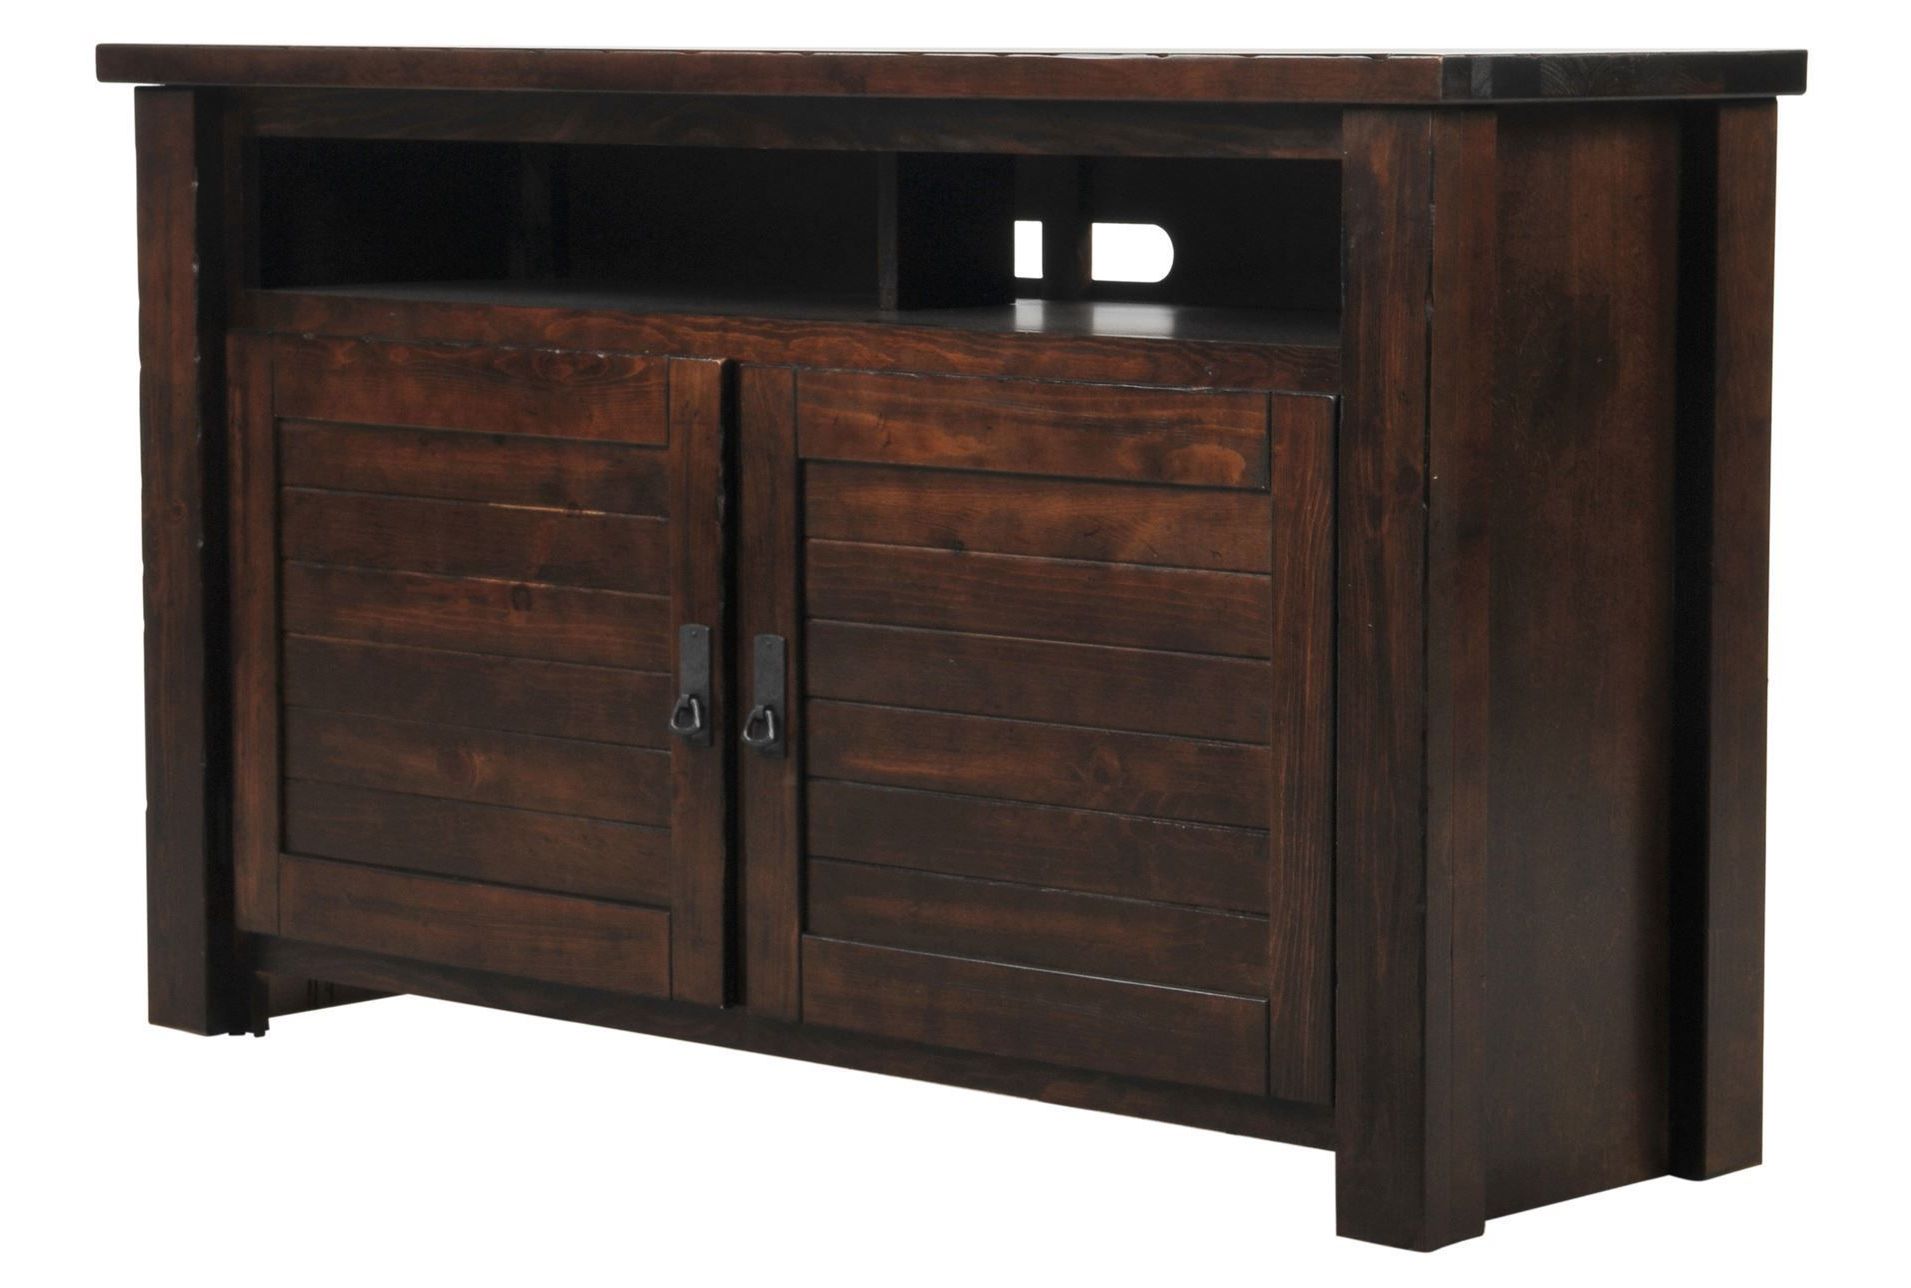 Canyon 54 Inch Tv Stand | Media | Living Spaces Furniture, Living In Canyon 54 Inch Tv Stands (View 2 of 20)